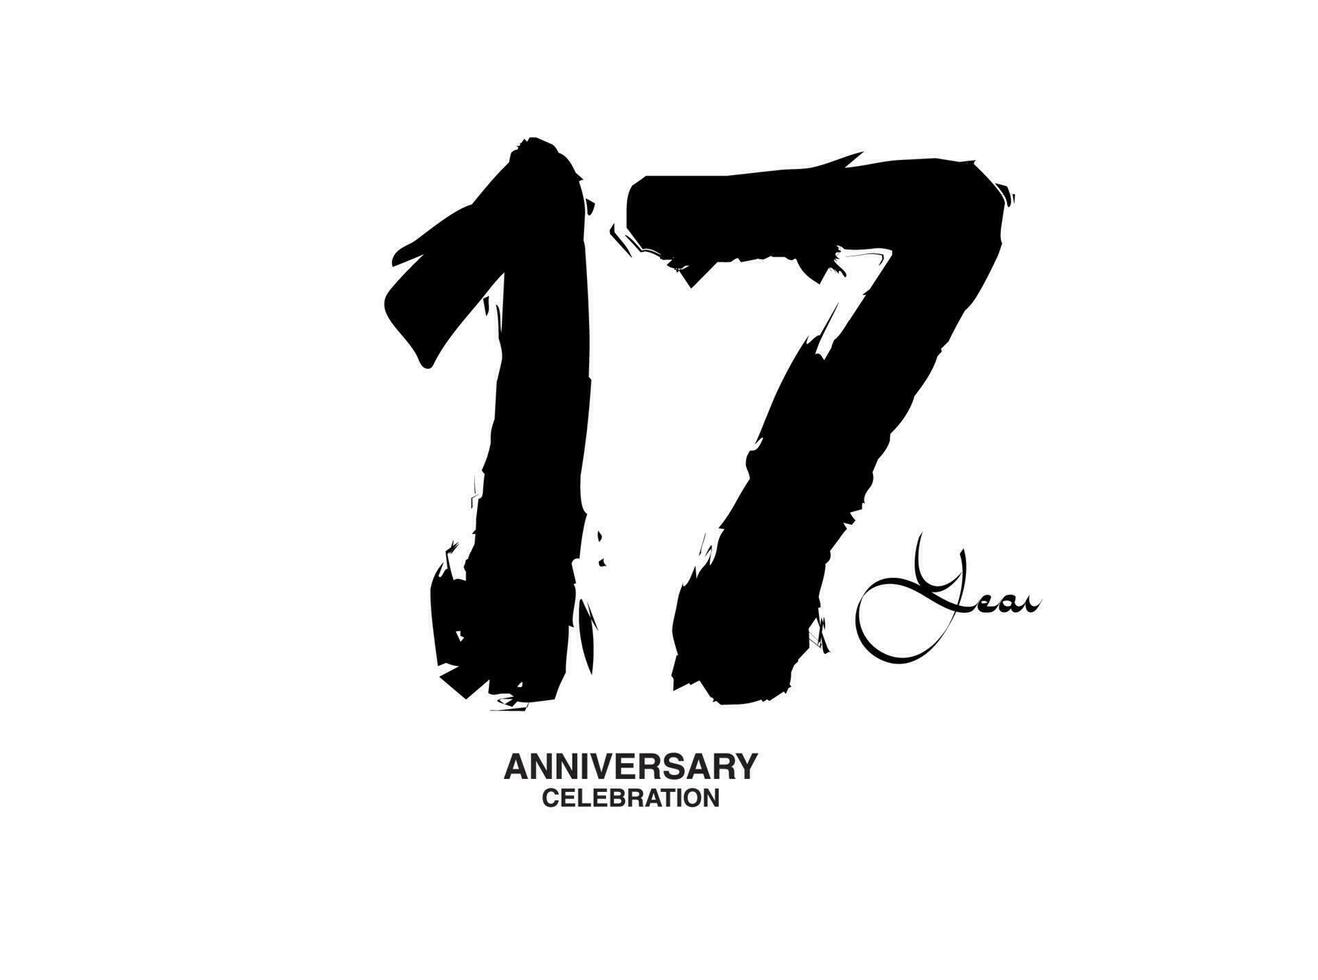 17 Years Anniversary Celebration Vector Template, 17 number logo design, 17th birthday, Black Lettering Numbers brush drawing hand drawn sketch, black number, Anniversary vector illustration